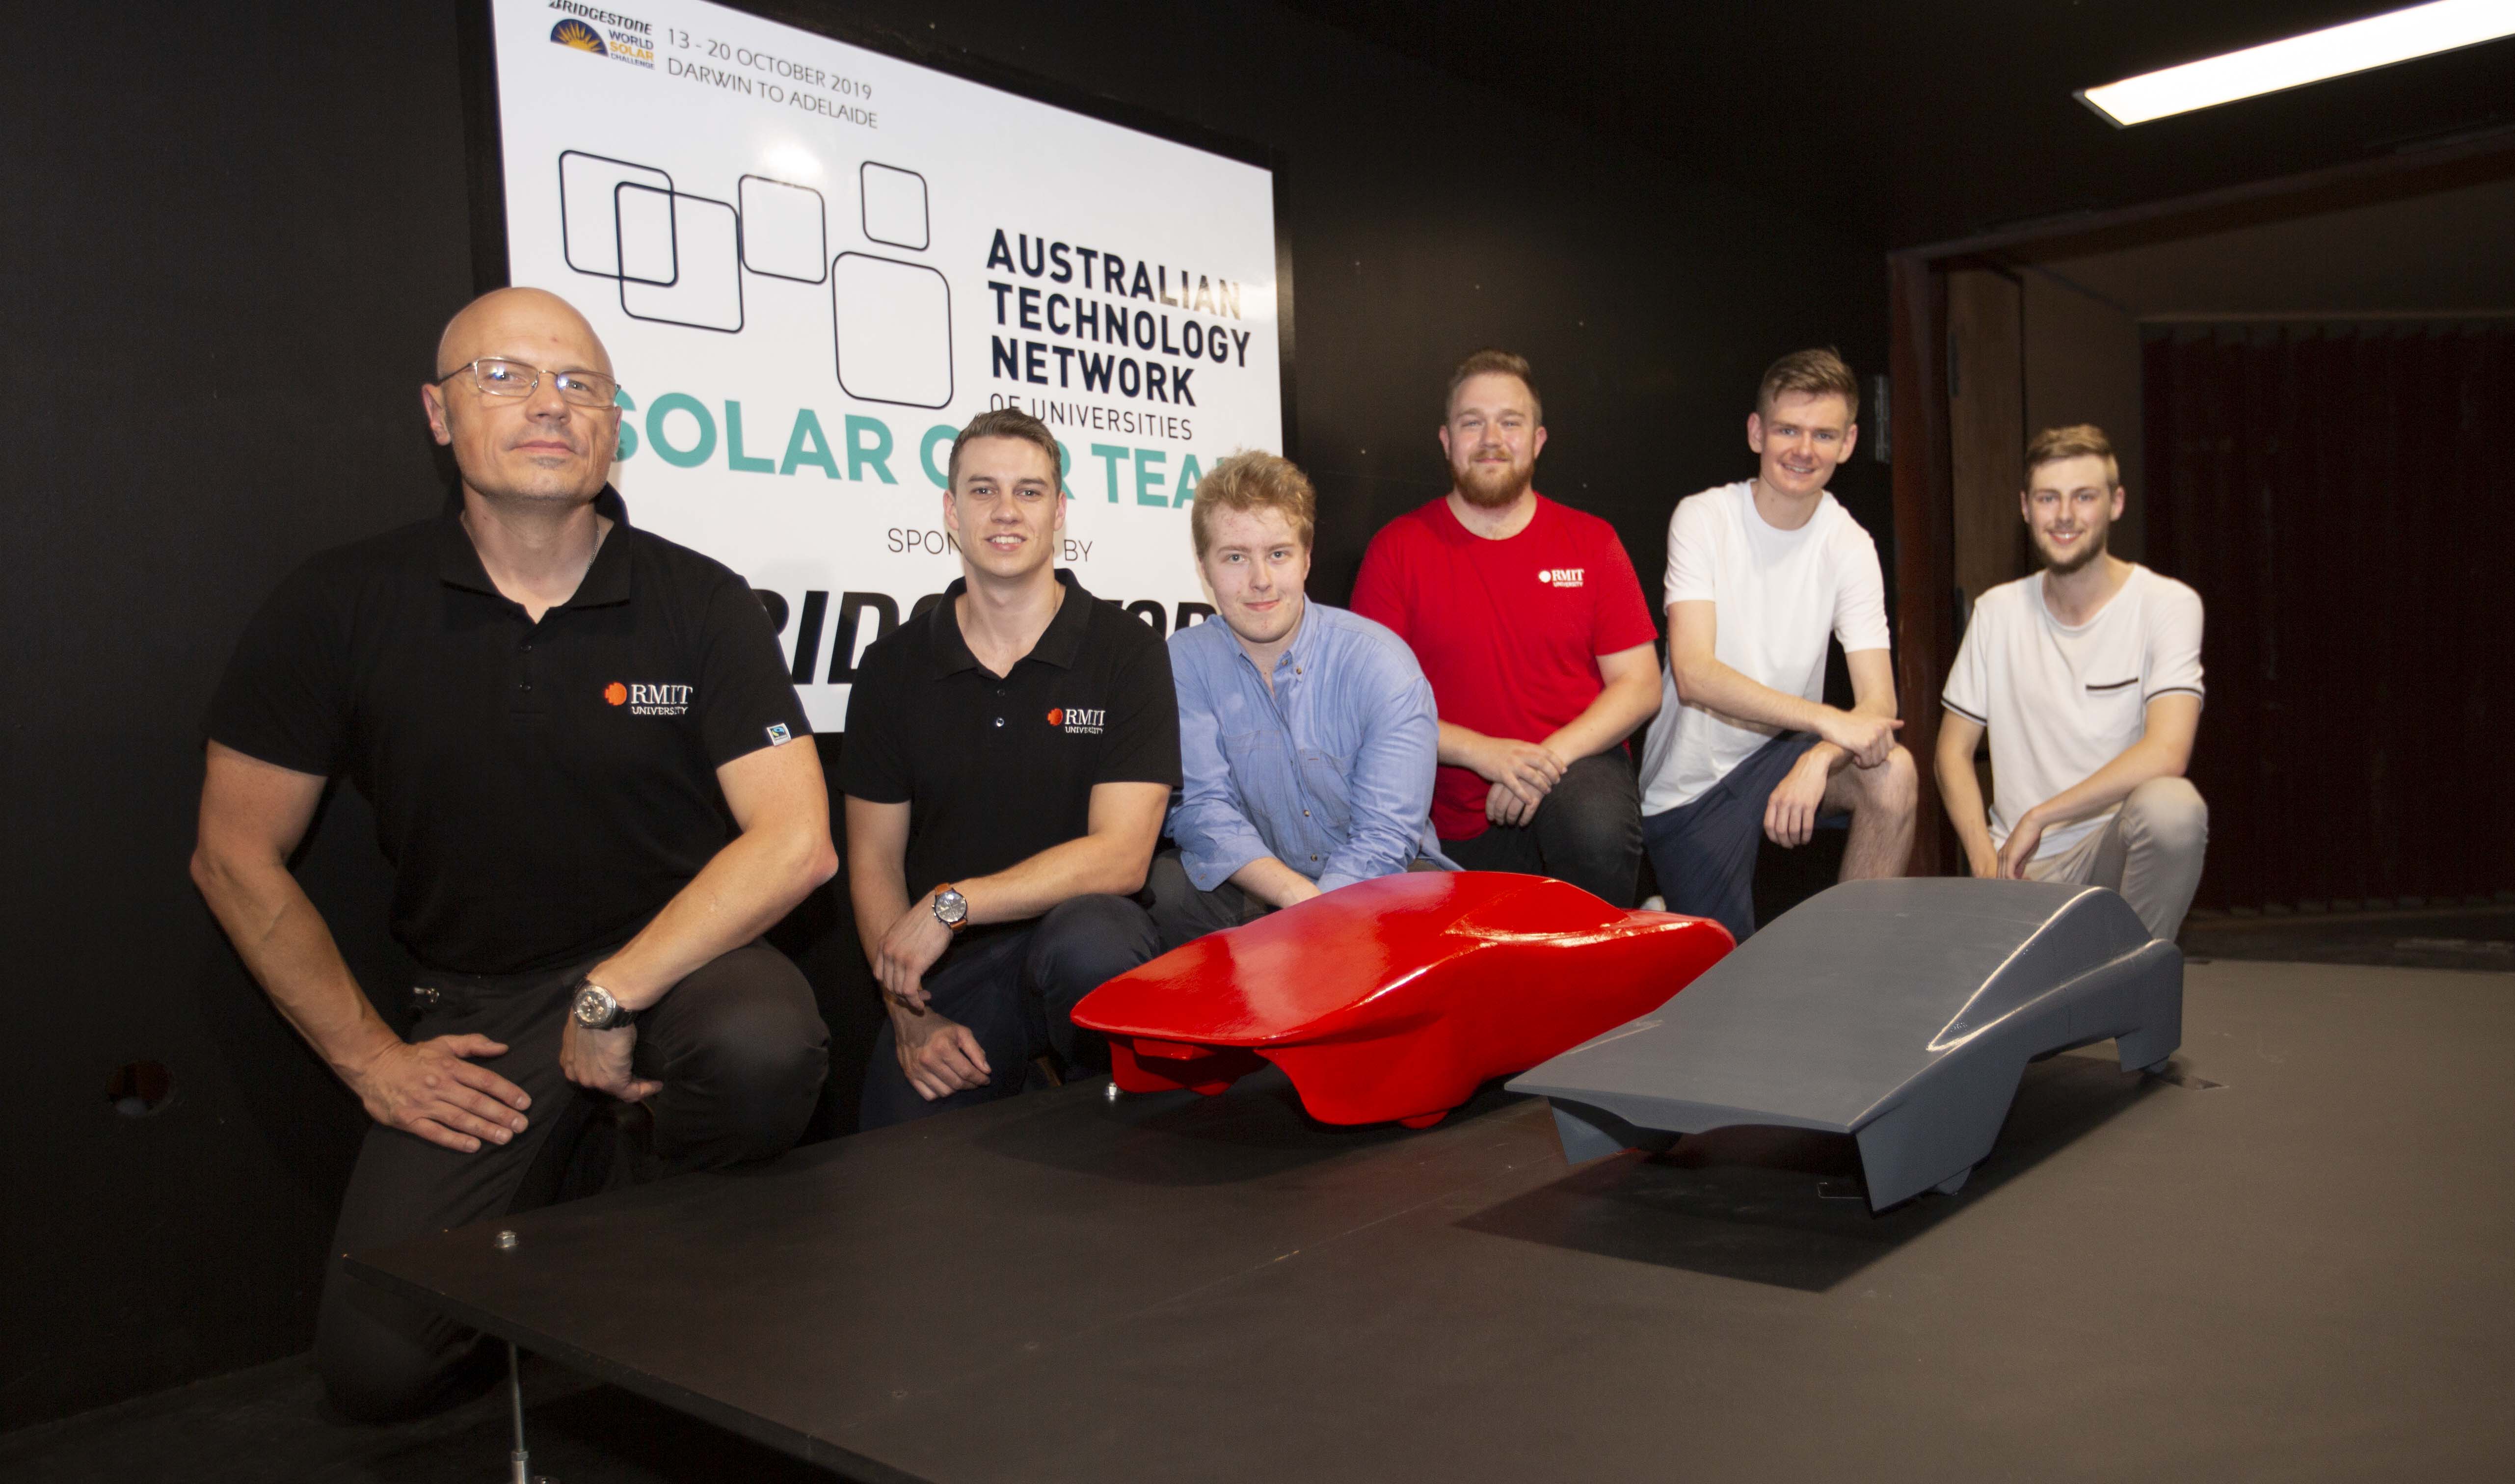 Preparing for the challenge: the ATN solar car team in the RMIT industrial wind tunnel.